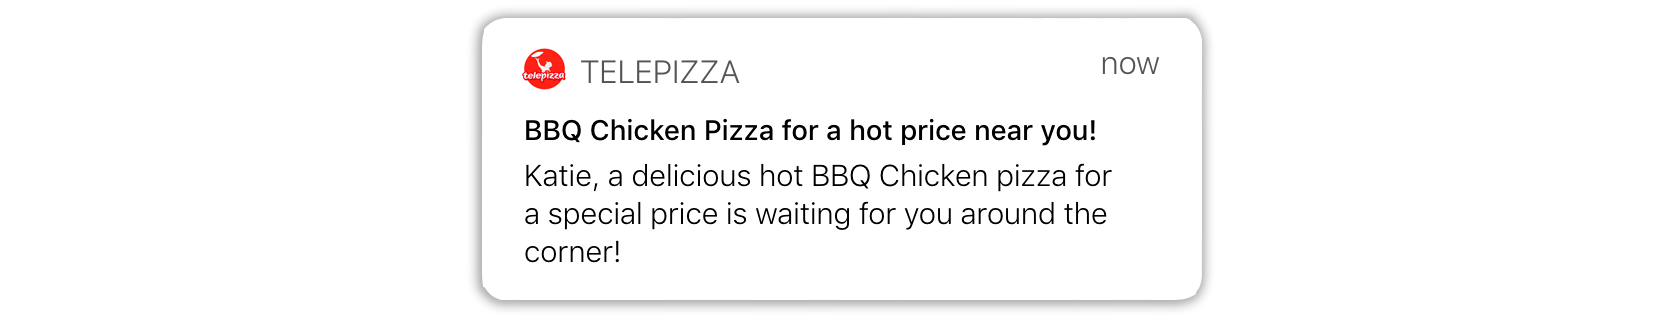 Example of a geo-targeted push notification from Telepizza